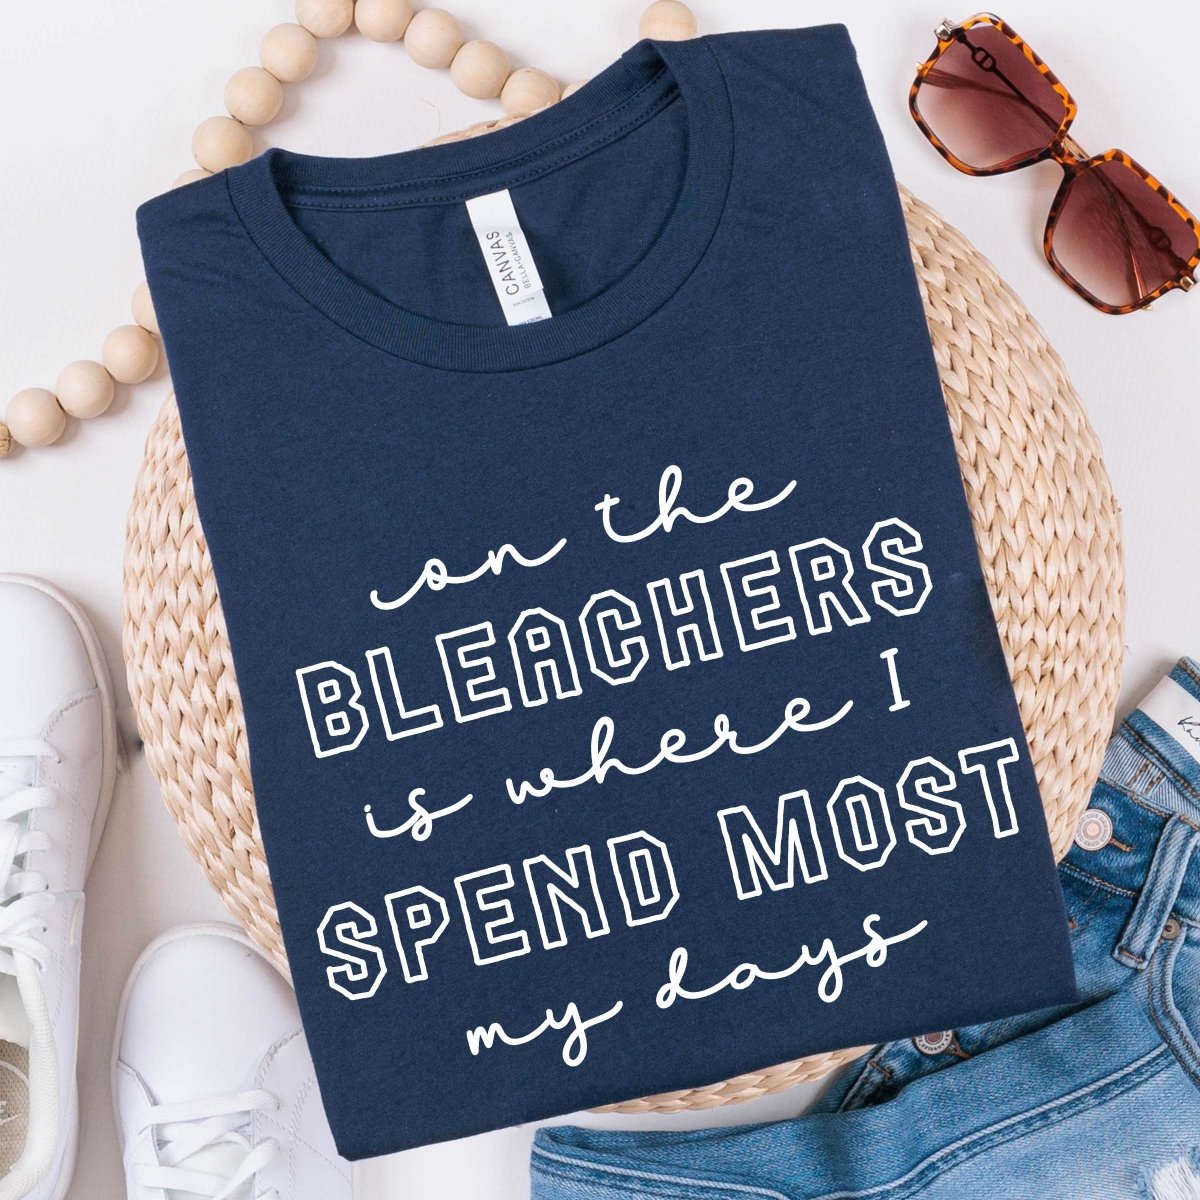 Bleachers Spend Most of my days Tee - Limeberry Designs